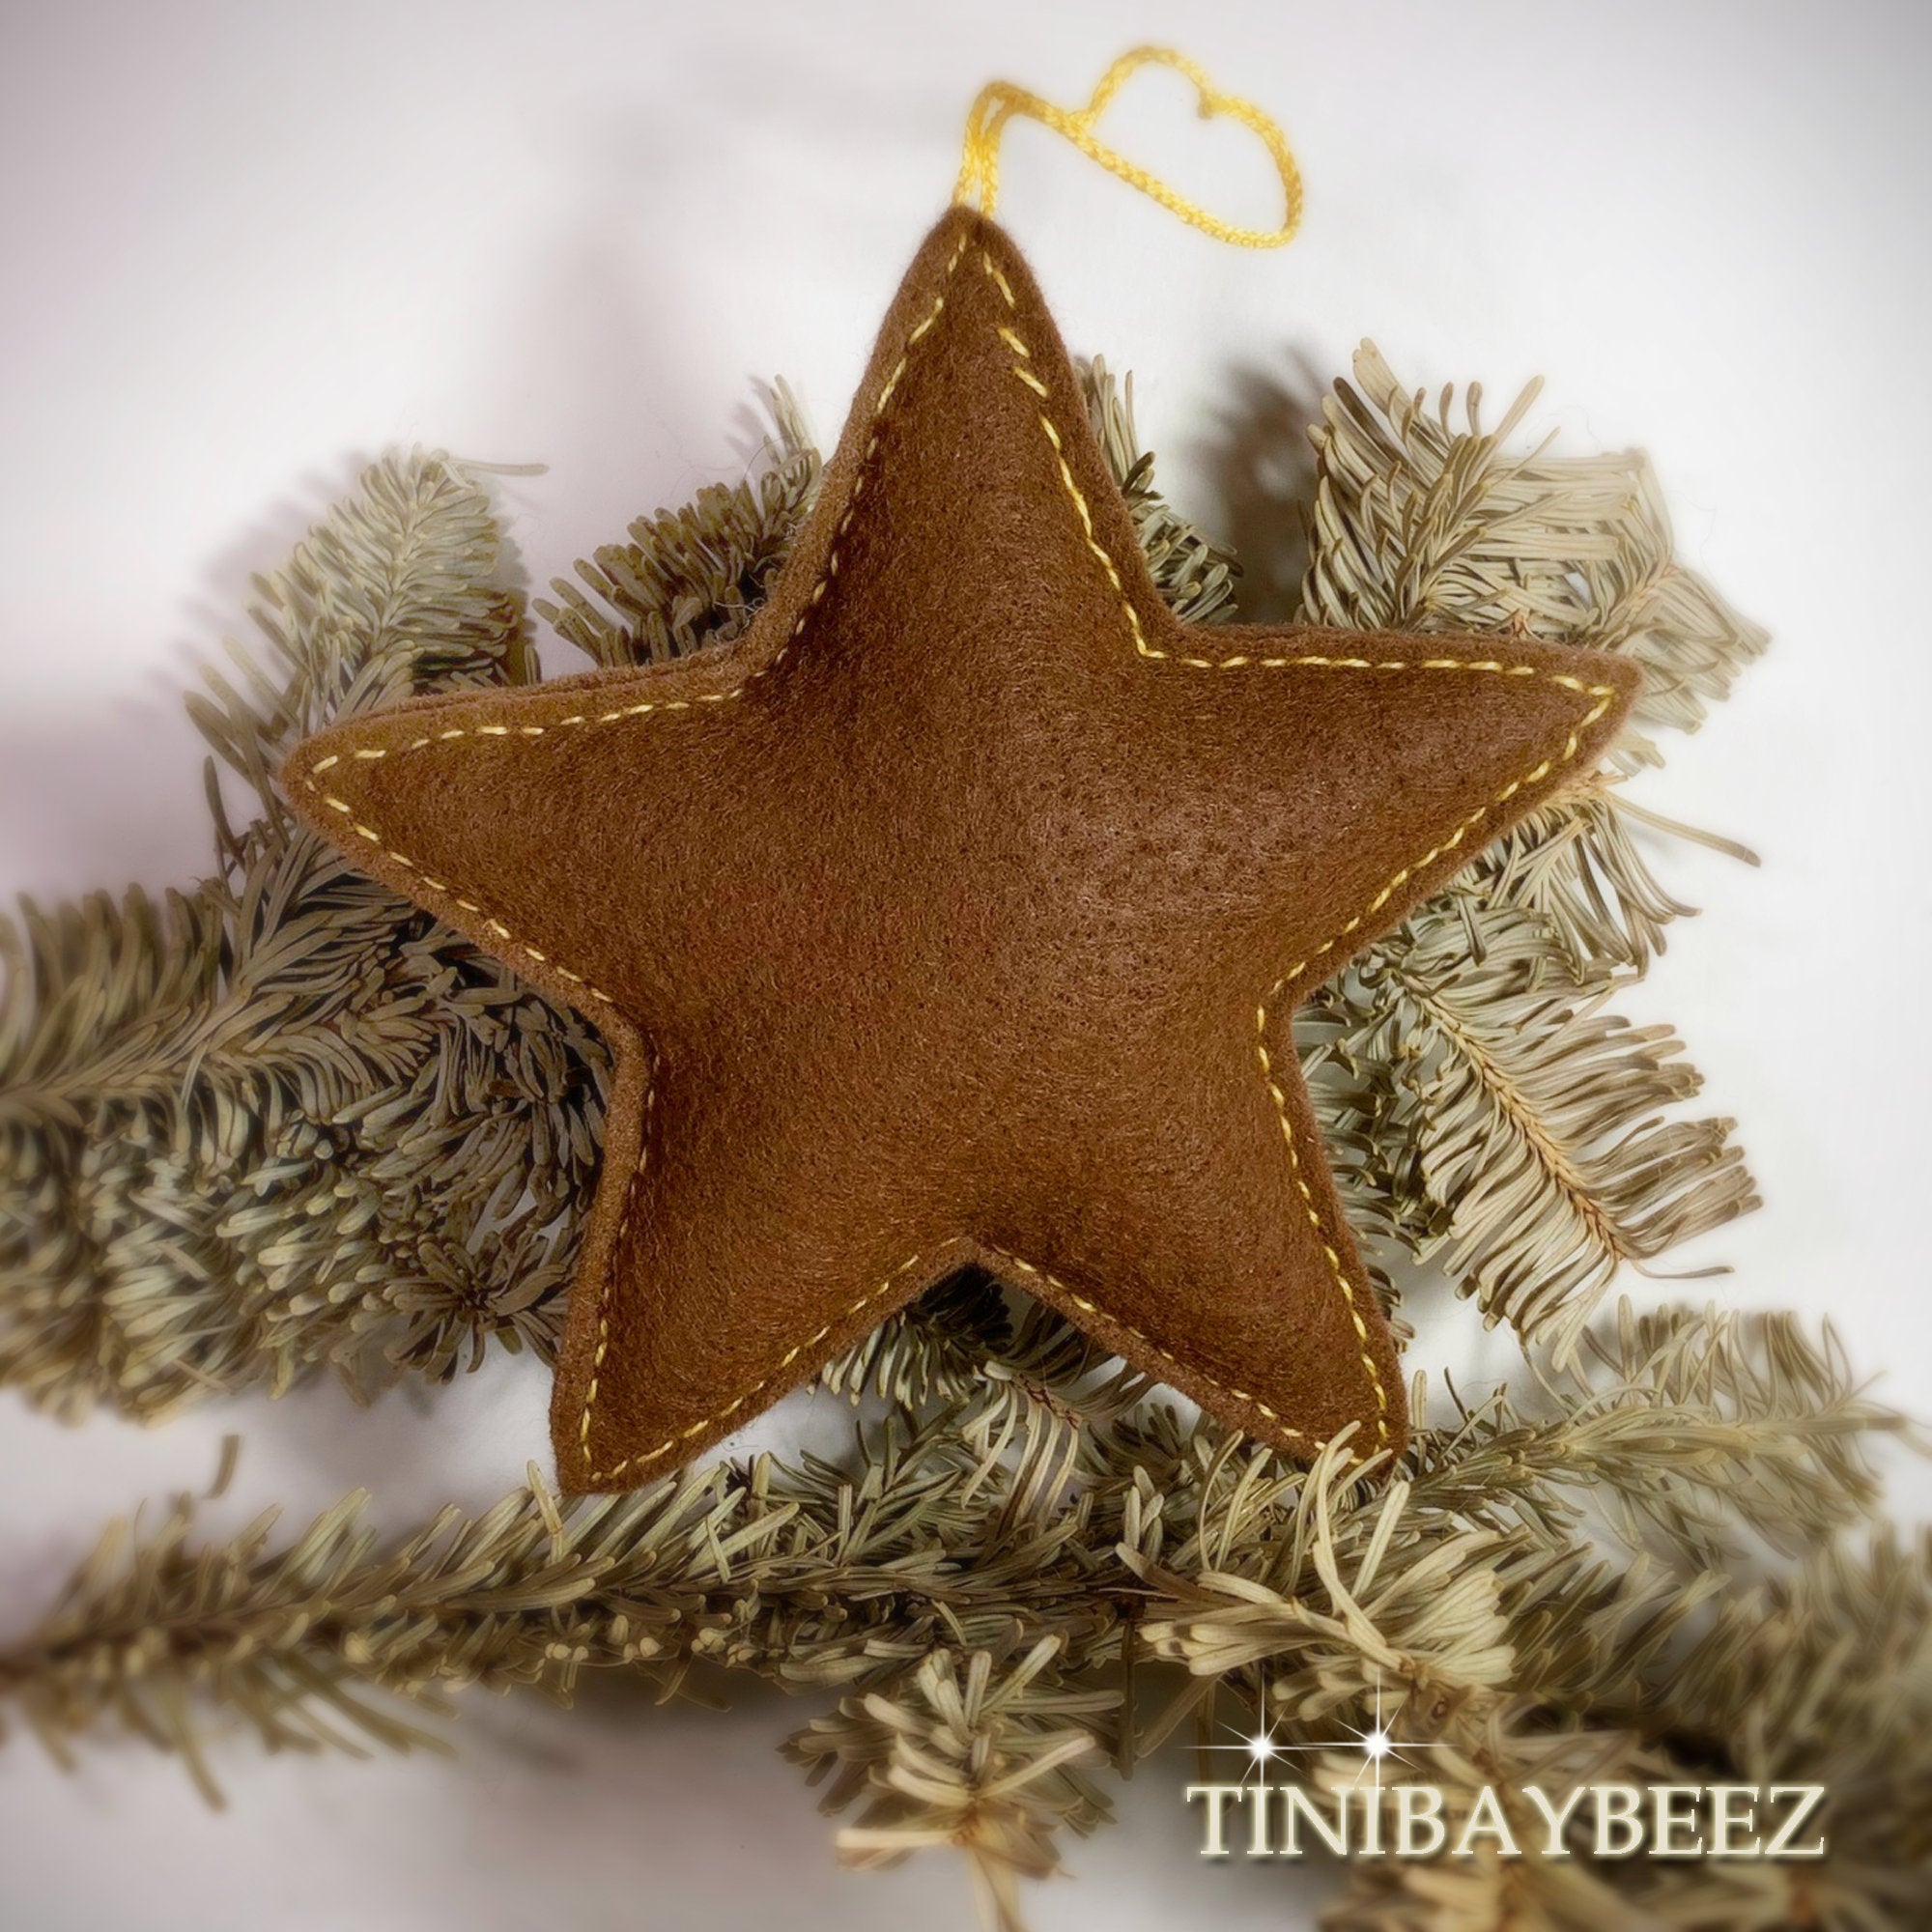 Embroidered Felt Star Ornament with sparkling sequins